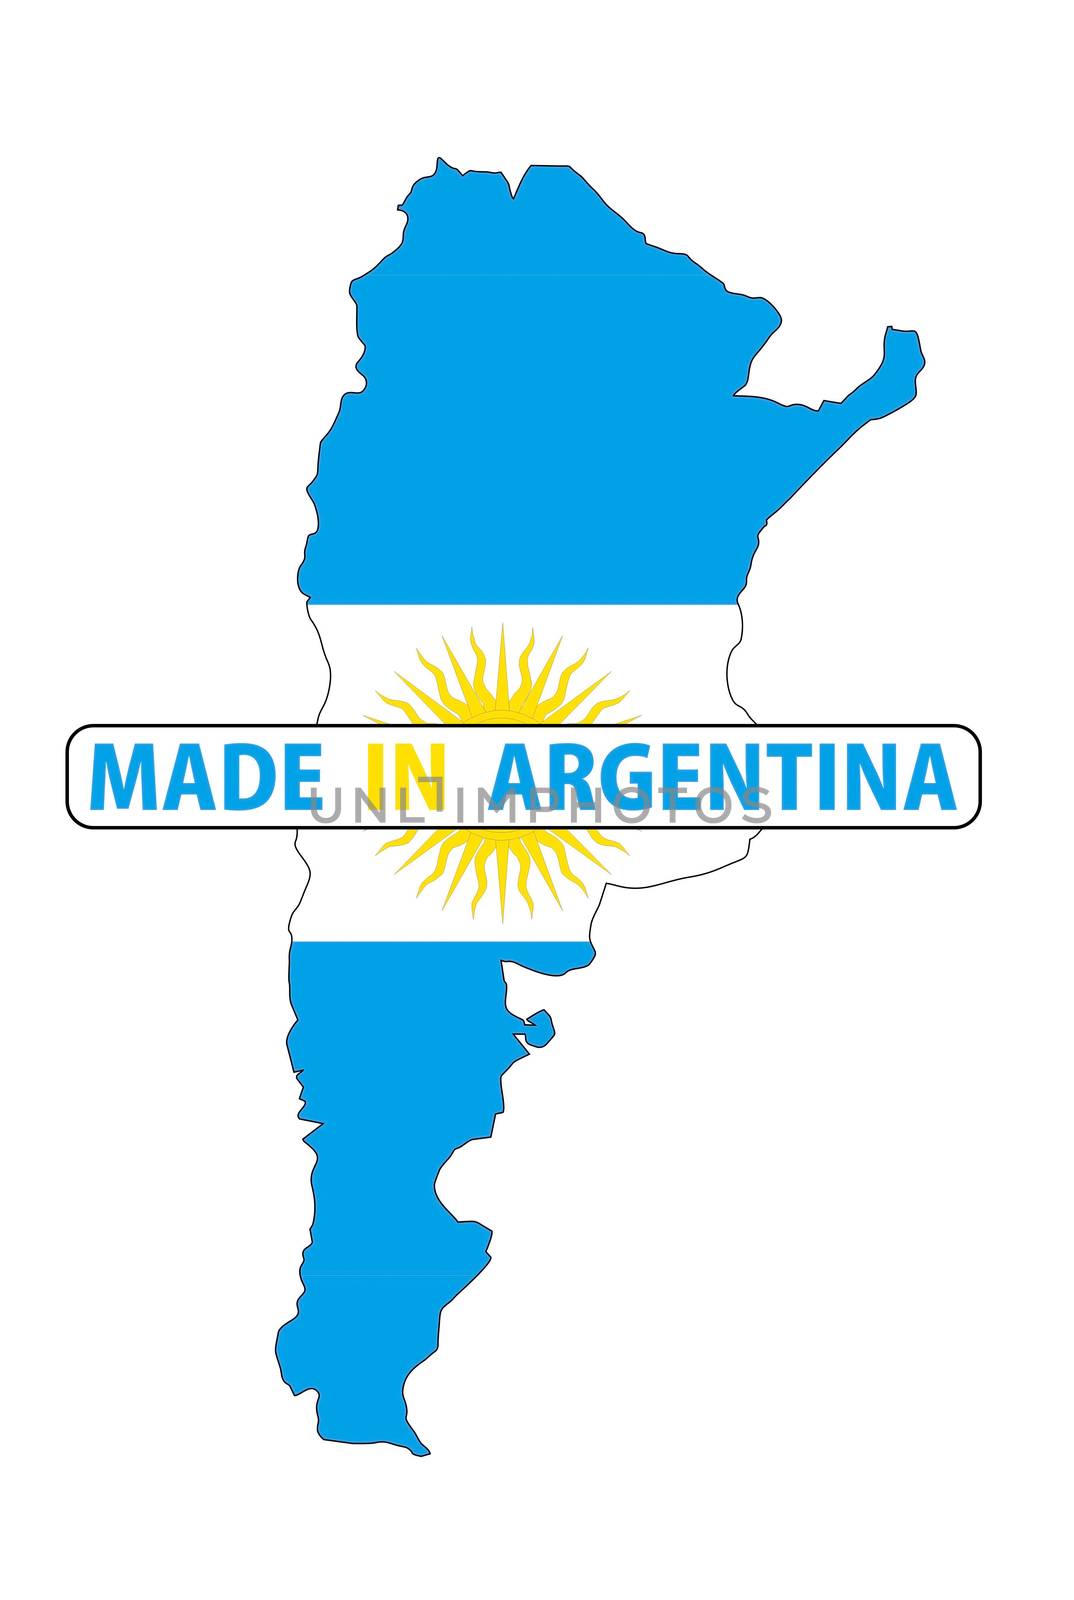 made in argentina  by tony4urban